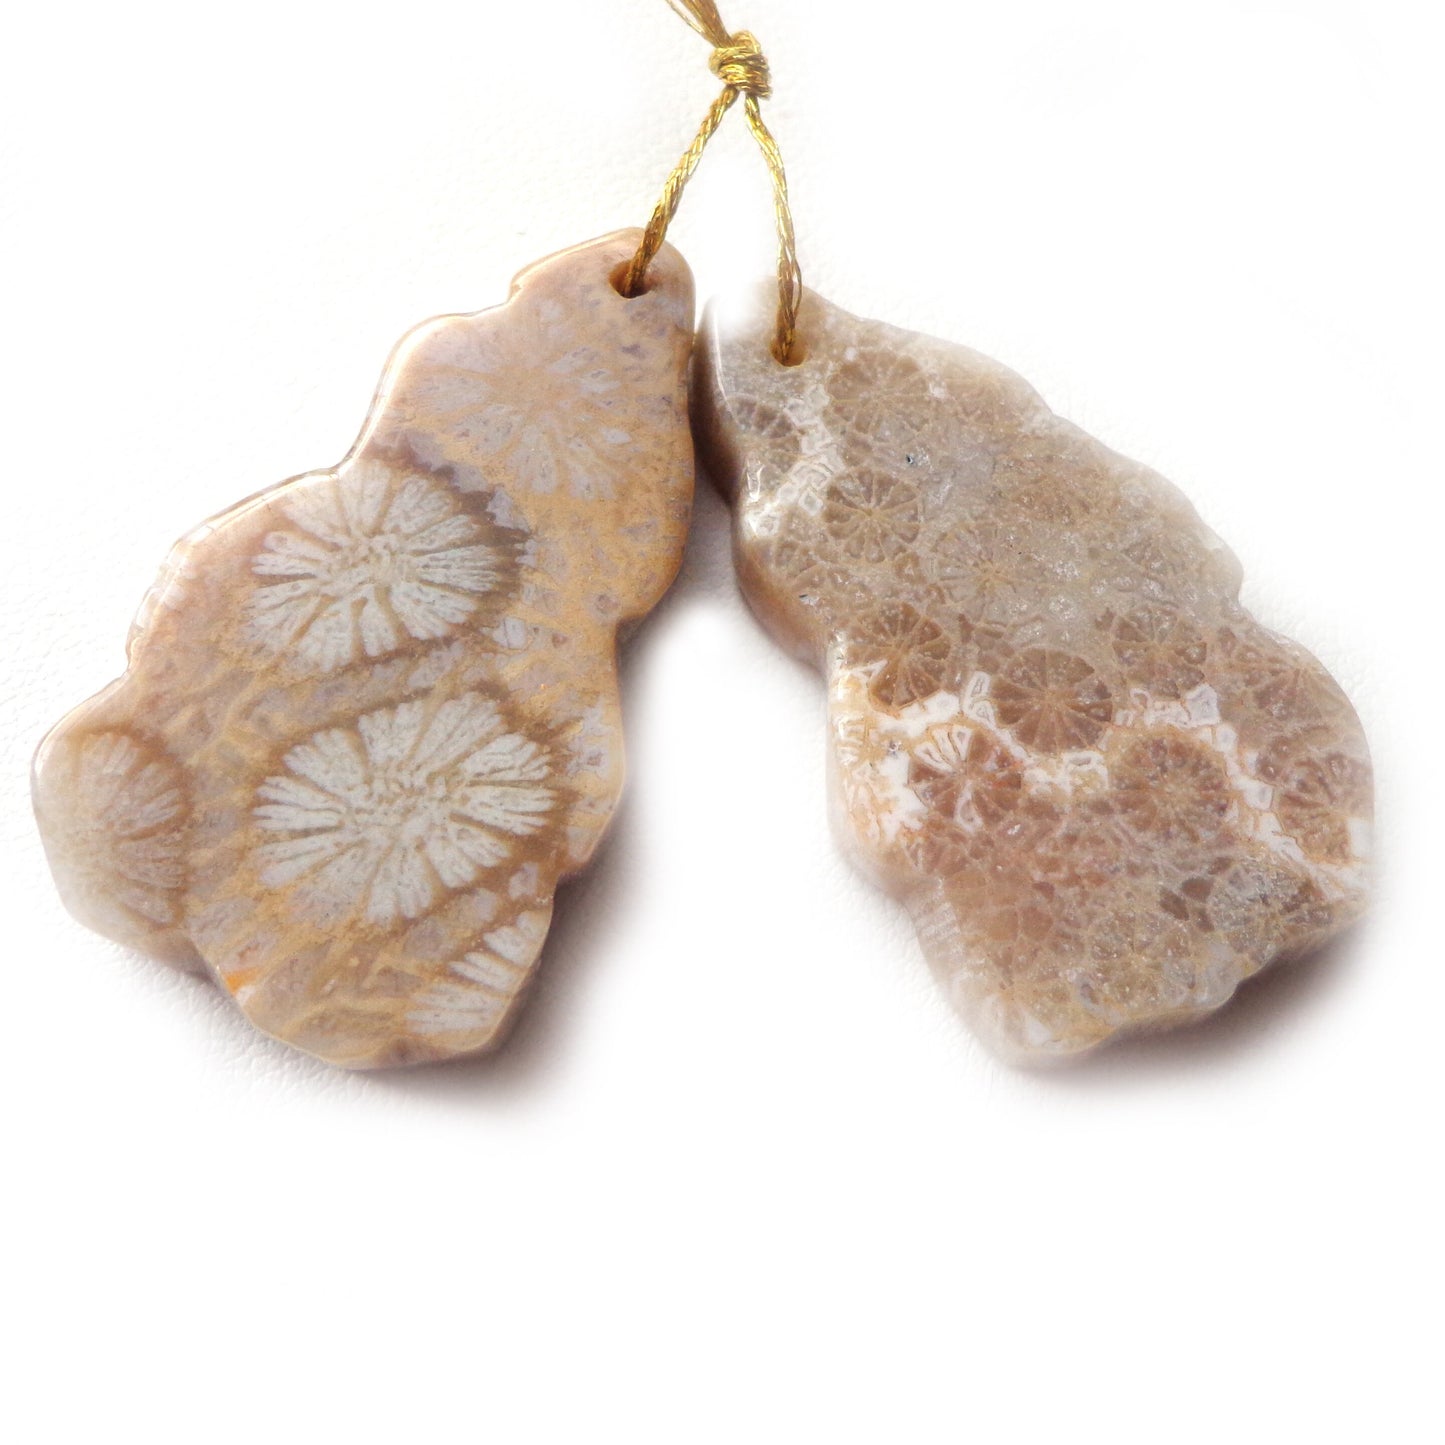 AAA Natural Gemstone Fossil Coral Agate Pendant, 34x18mm Grey, Free Form shape, Great for JEWELRY making! Not Treated in anyway!